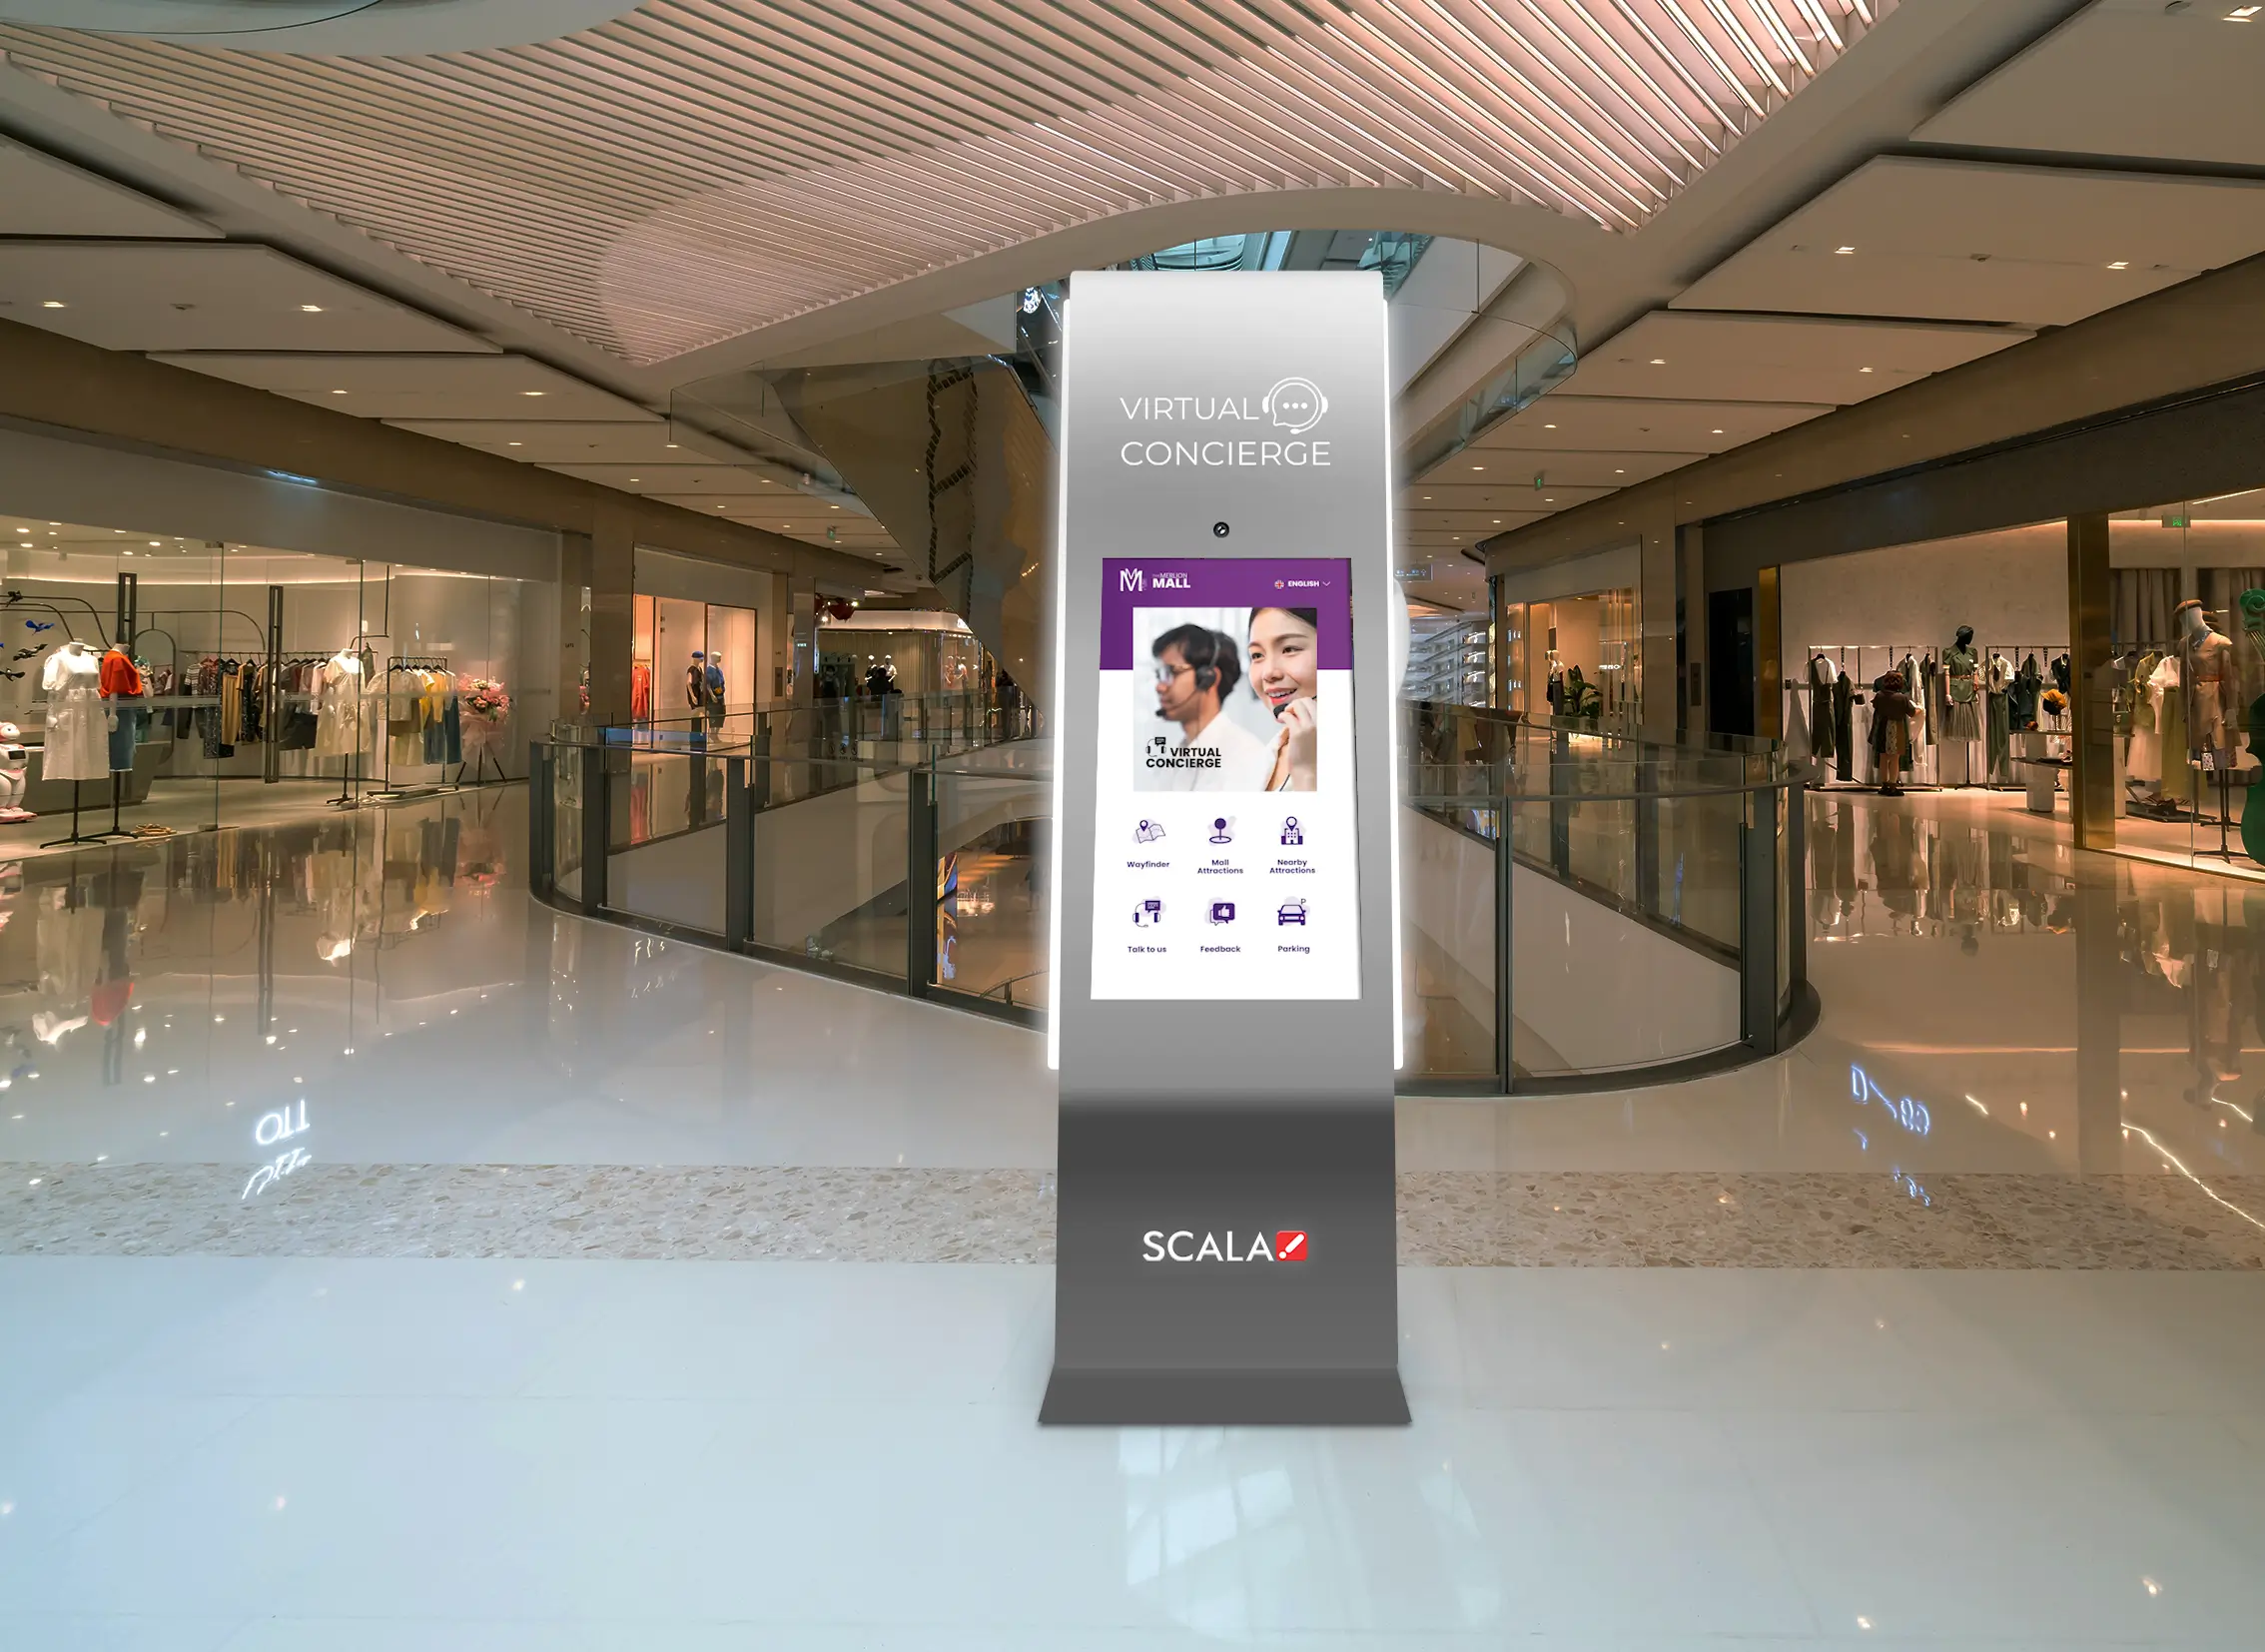 Digital signage for visual merchandising in a retail store